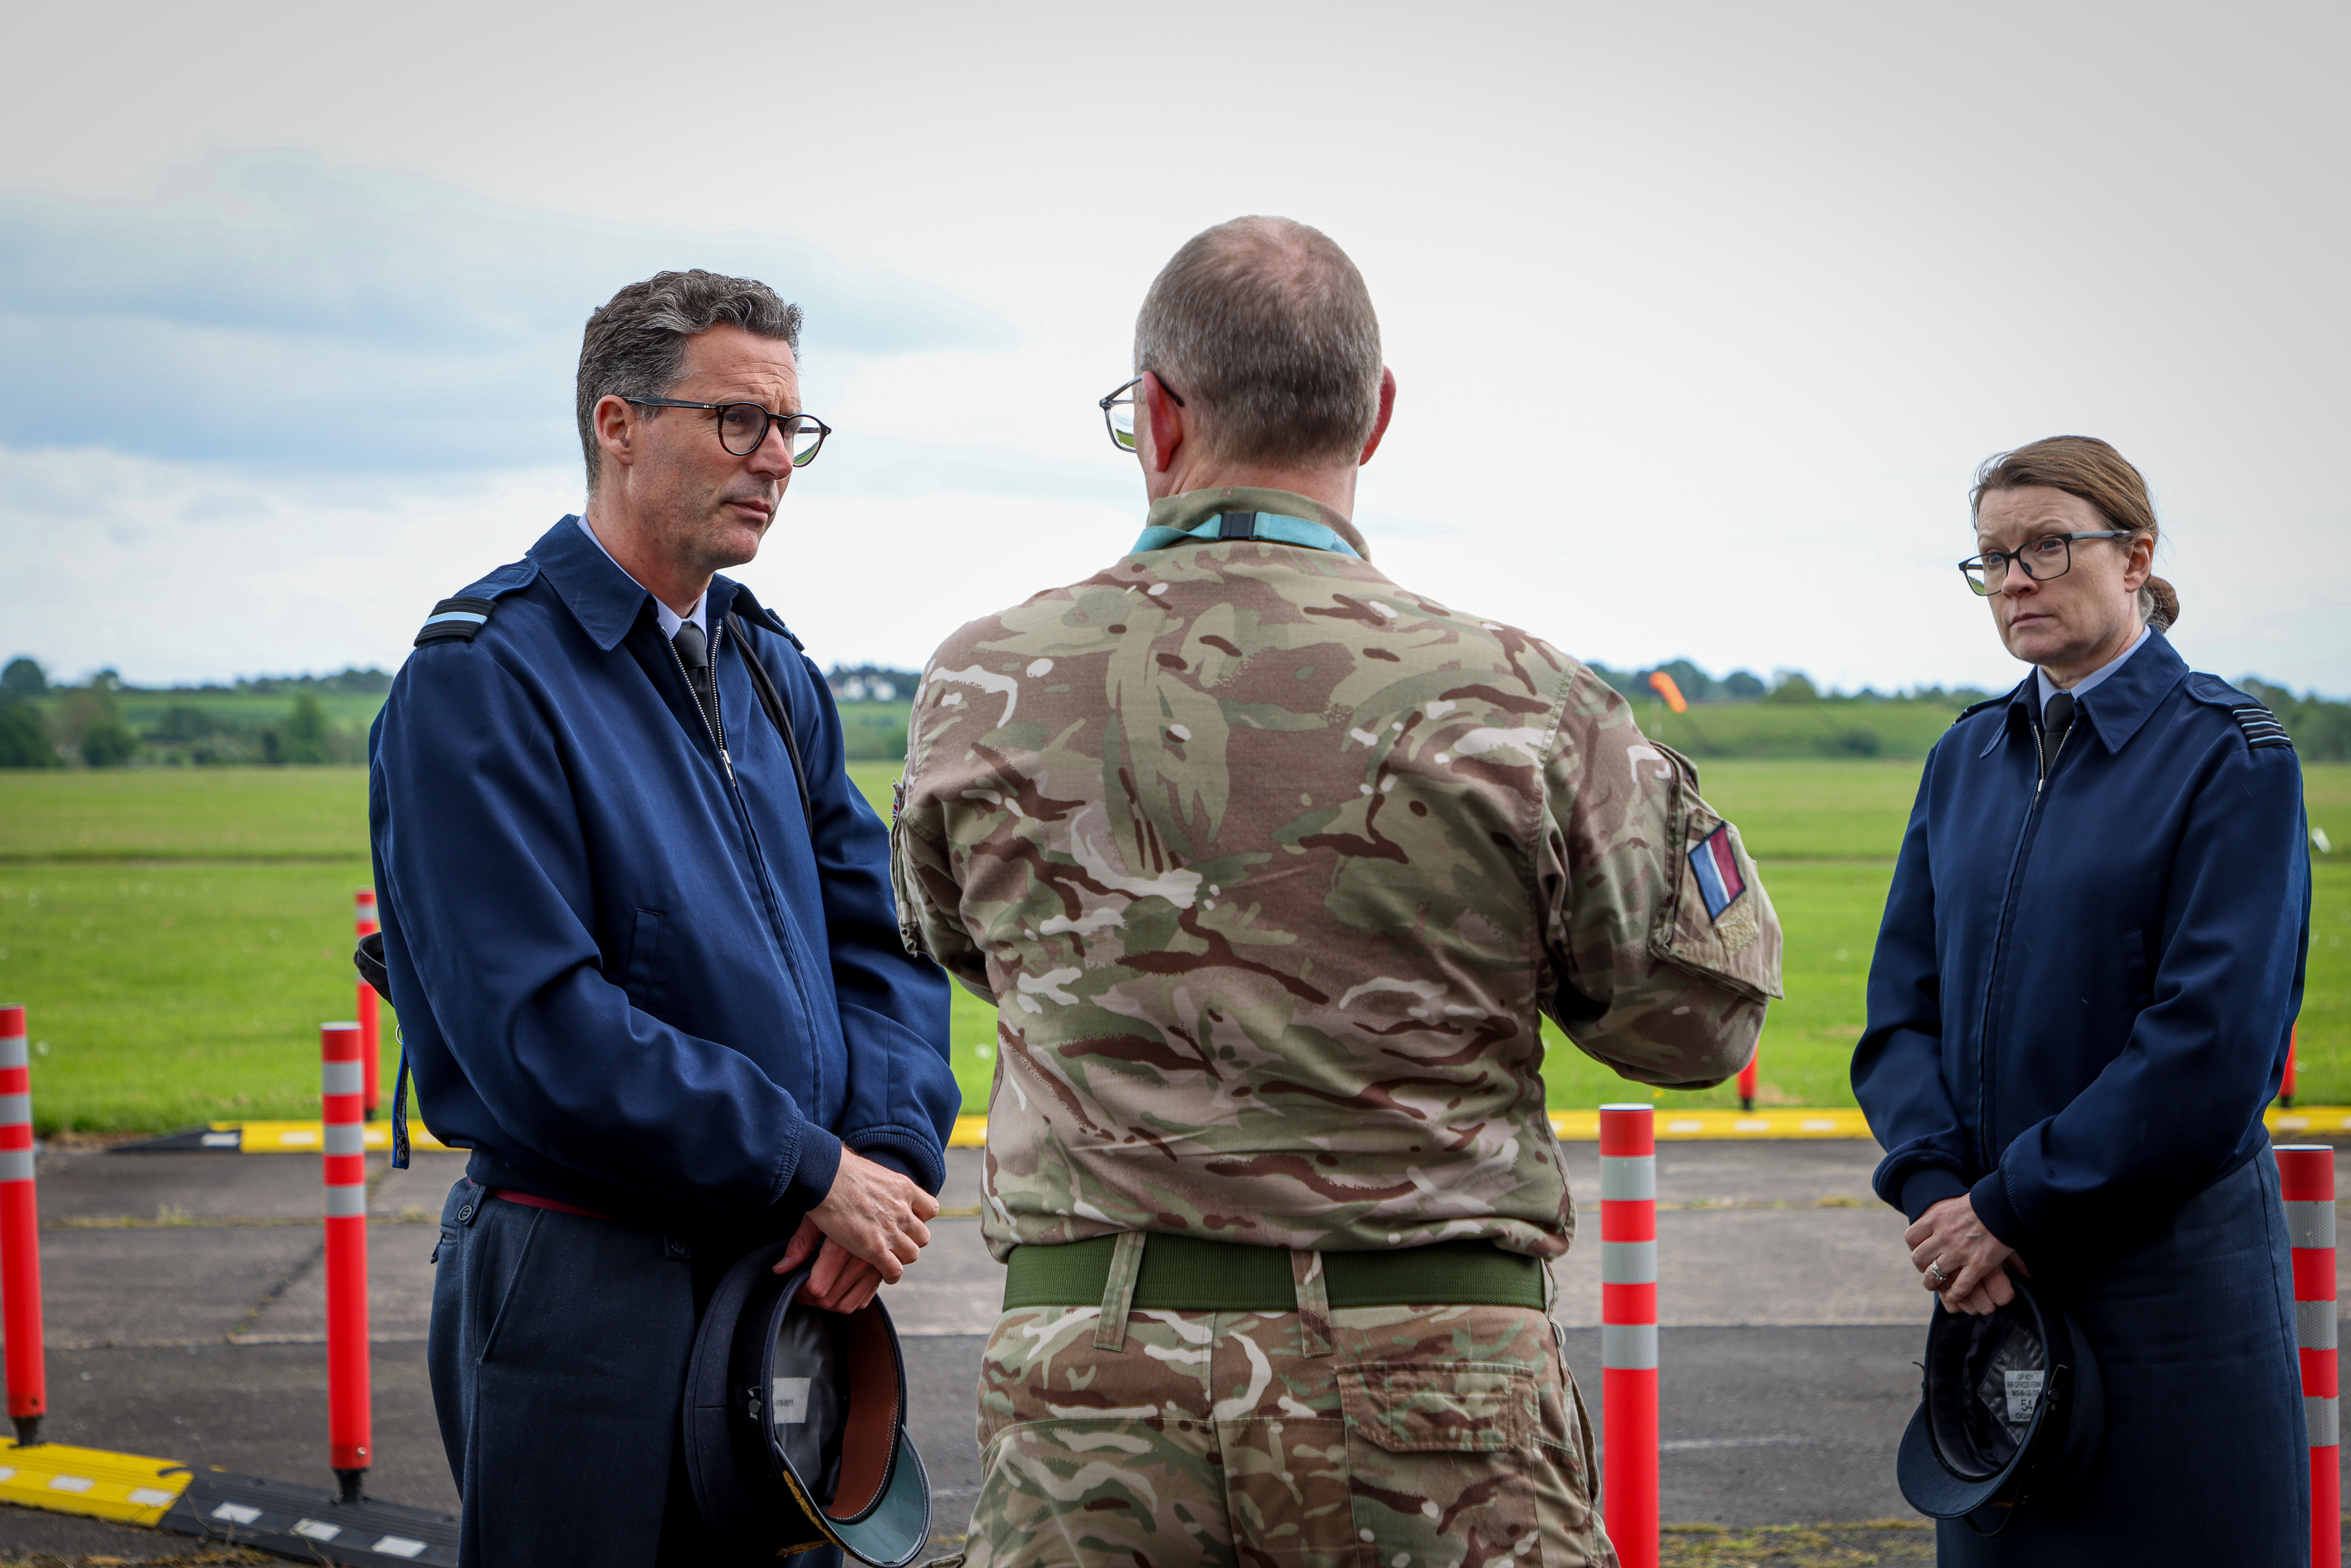 Air Commodore Portlock on the airfield of RAF Cosford with staiton executives